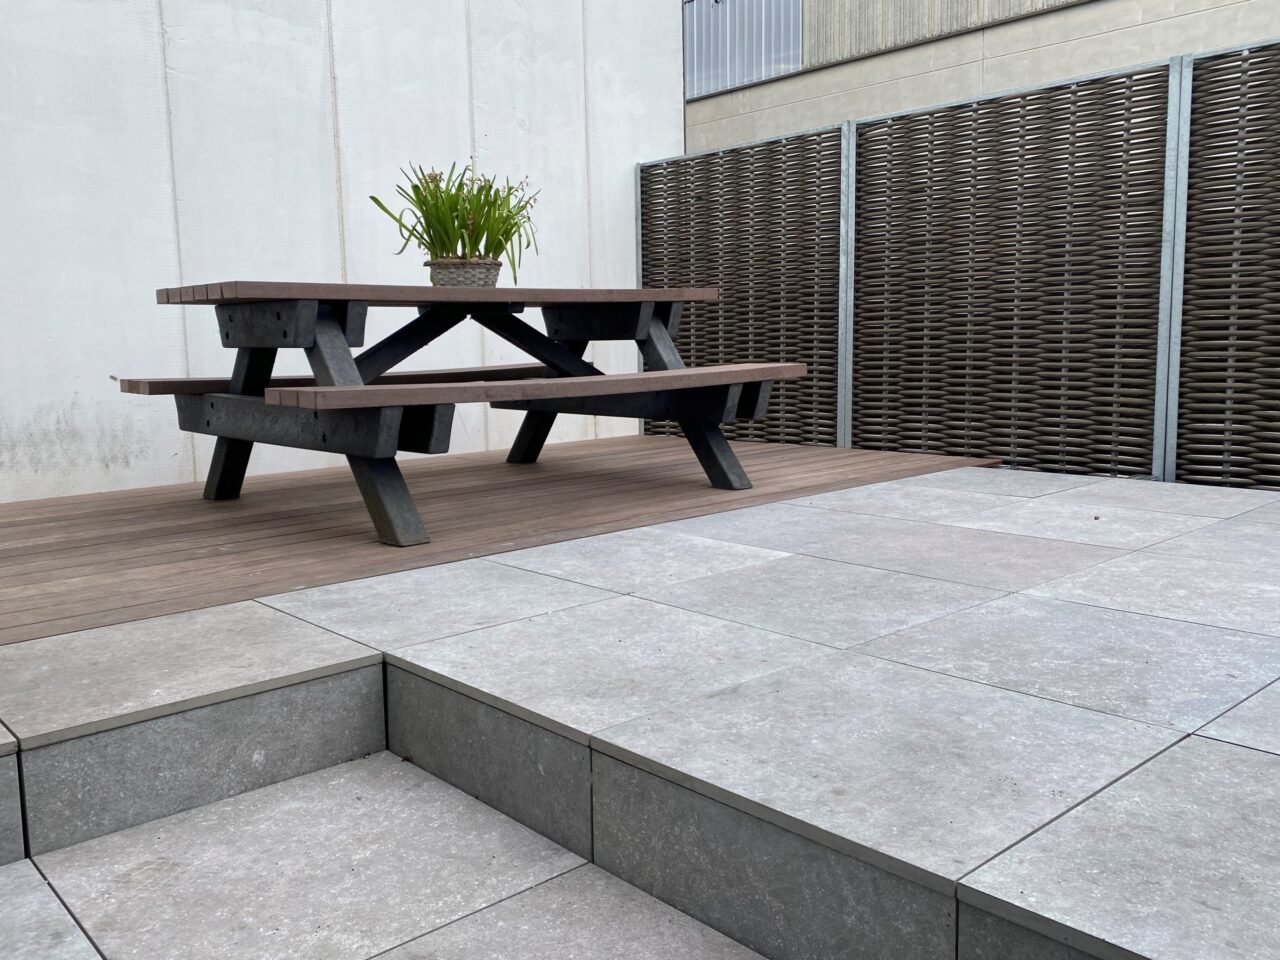 Terrace of the factory SOLIDOR, Wevelgem